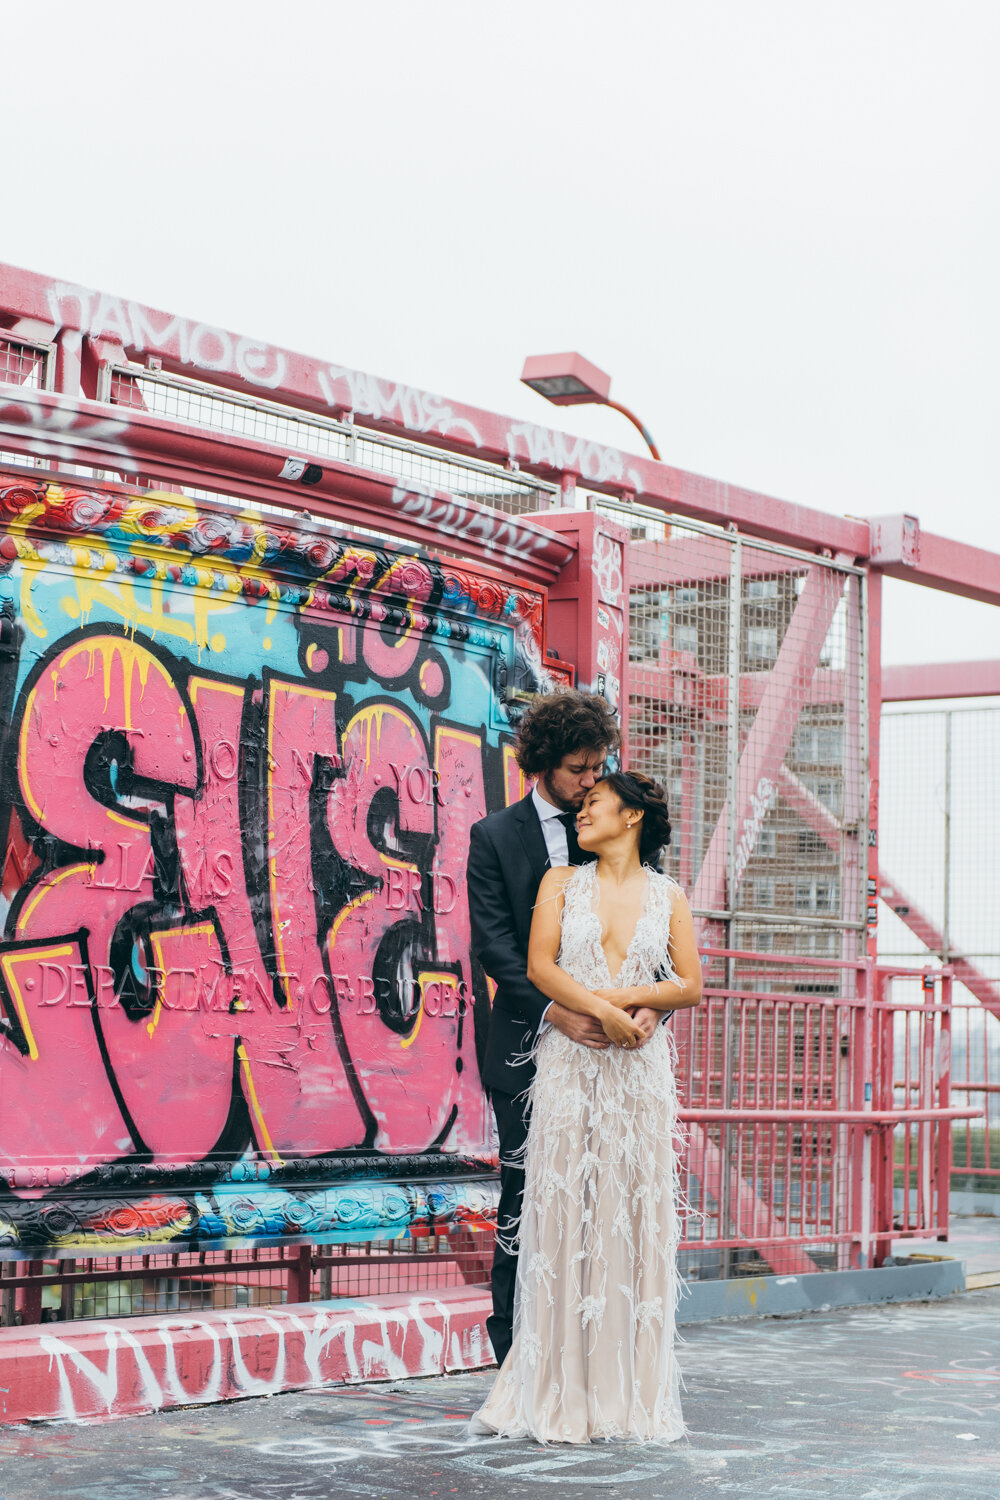 Bride and groom stands on the Williamsburg Bride in front of a wall of graffiti. He is standing behind her with arms around her and he kisses her forehead as she smiles with her eyes closed.

Central Park Wedding Photography. Williamsburg Bridge Bridal Portraits. Luxury NYC Wedding Photographer. Manhattan Micro Wedding.